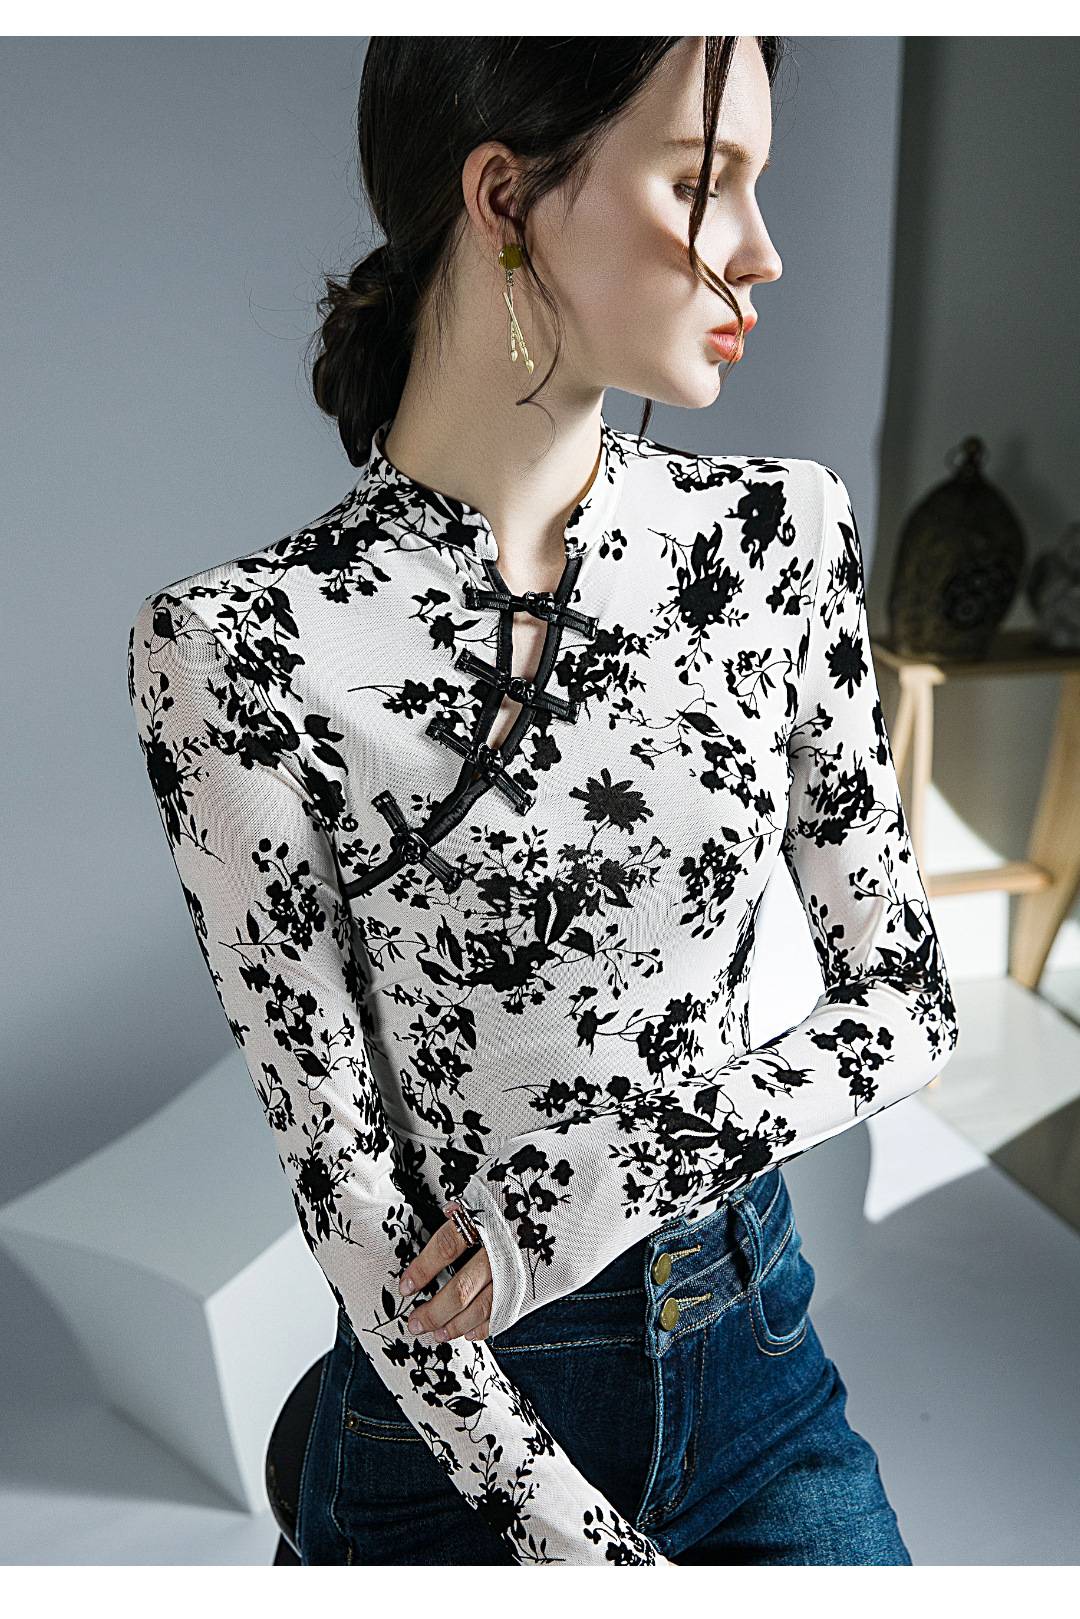 Fashionable Korean Blouses - Kawaii Stop - Autumn, Blouses, Blouses &amp; Shirts, Casual, Clothes, Crop Top, Crop Tops, Design, Fashion, Female, Grace Meeting, Print, Sexy, Style, T Shirt, Tops &amp; Tees, Women, Women's Clothing &amp; Accessories